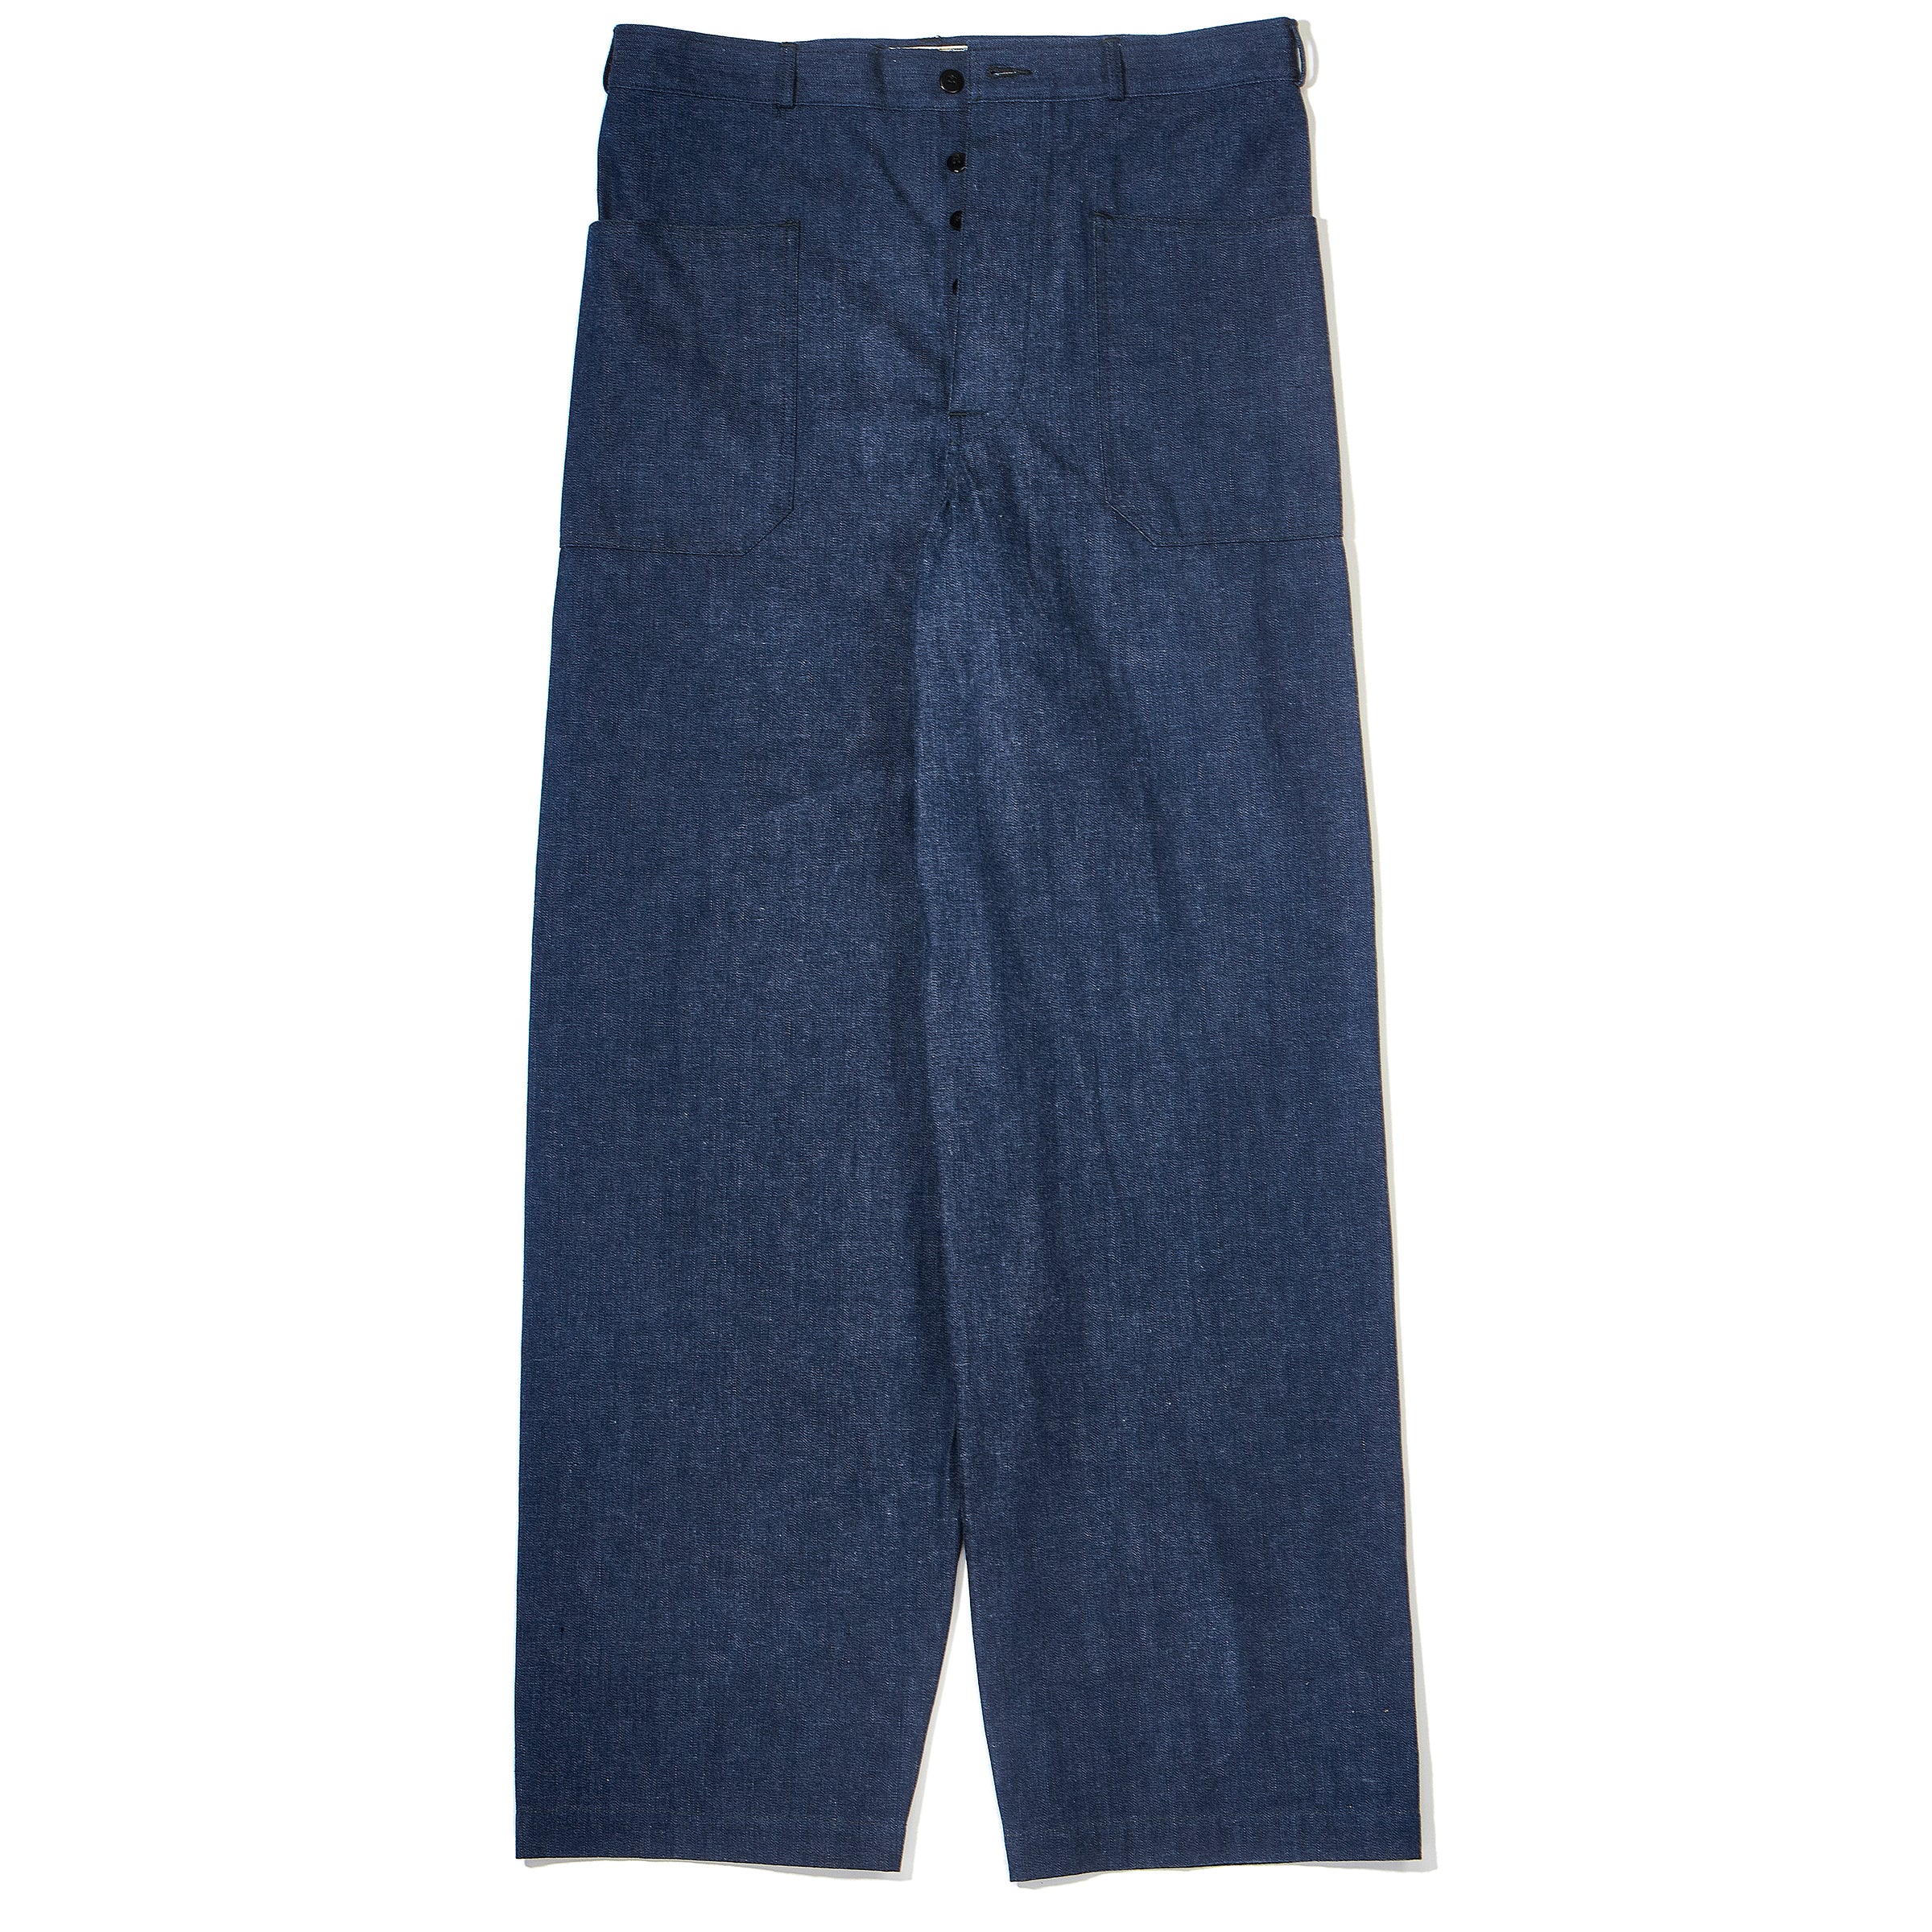 U.S. NAVY DENIM DUNGAREE TROUSERS – The Real McCoy's